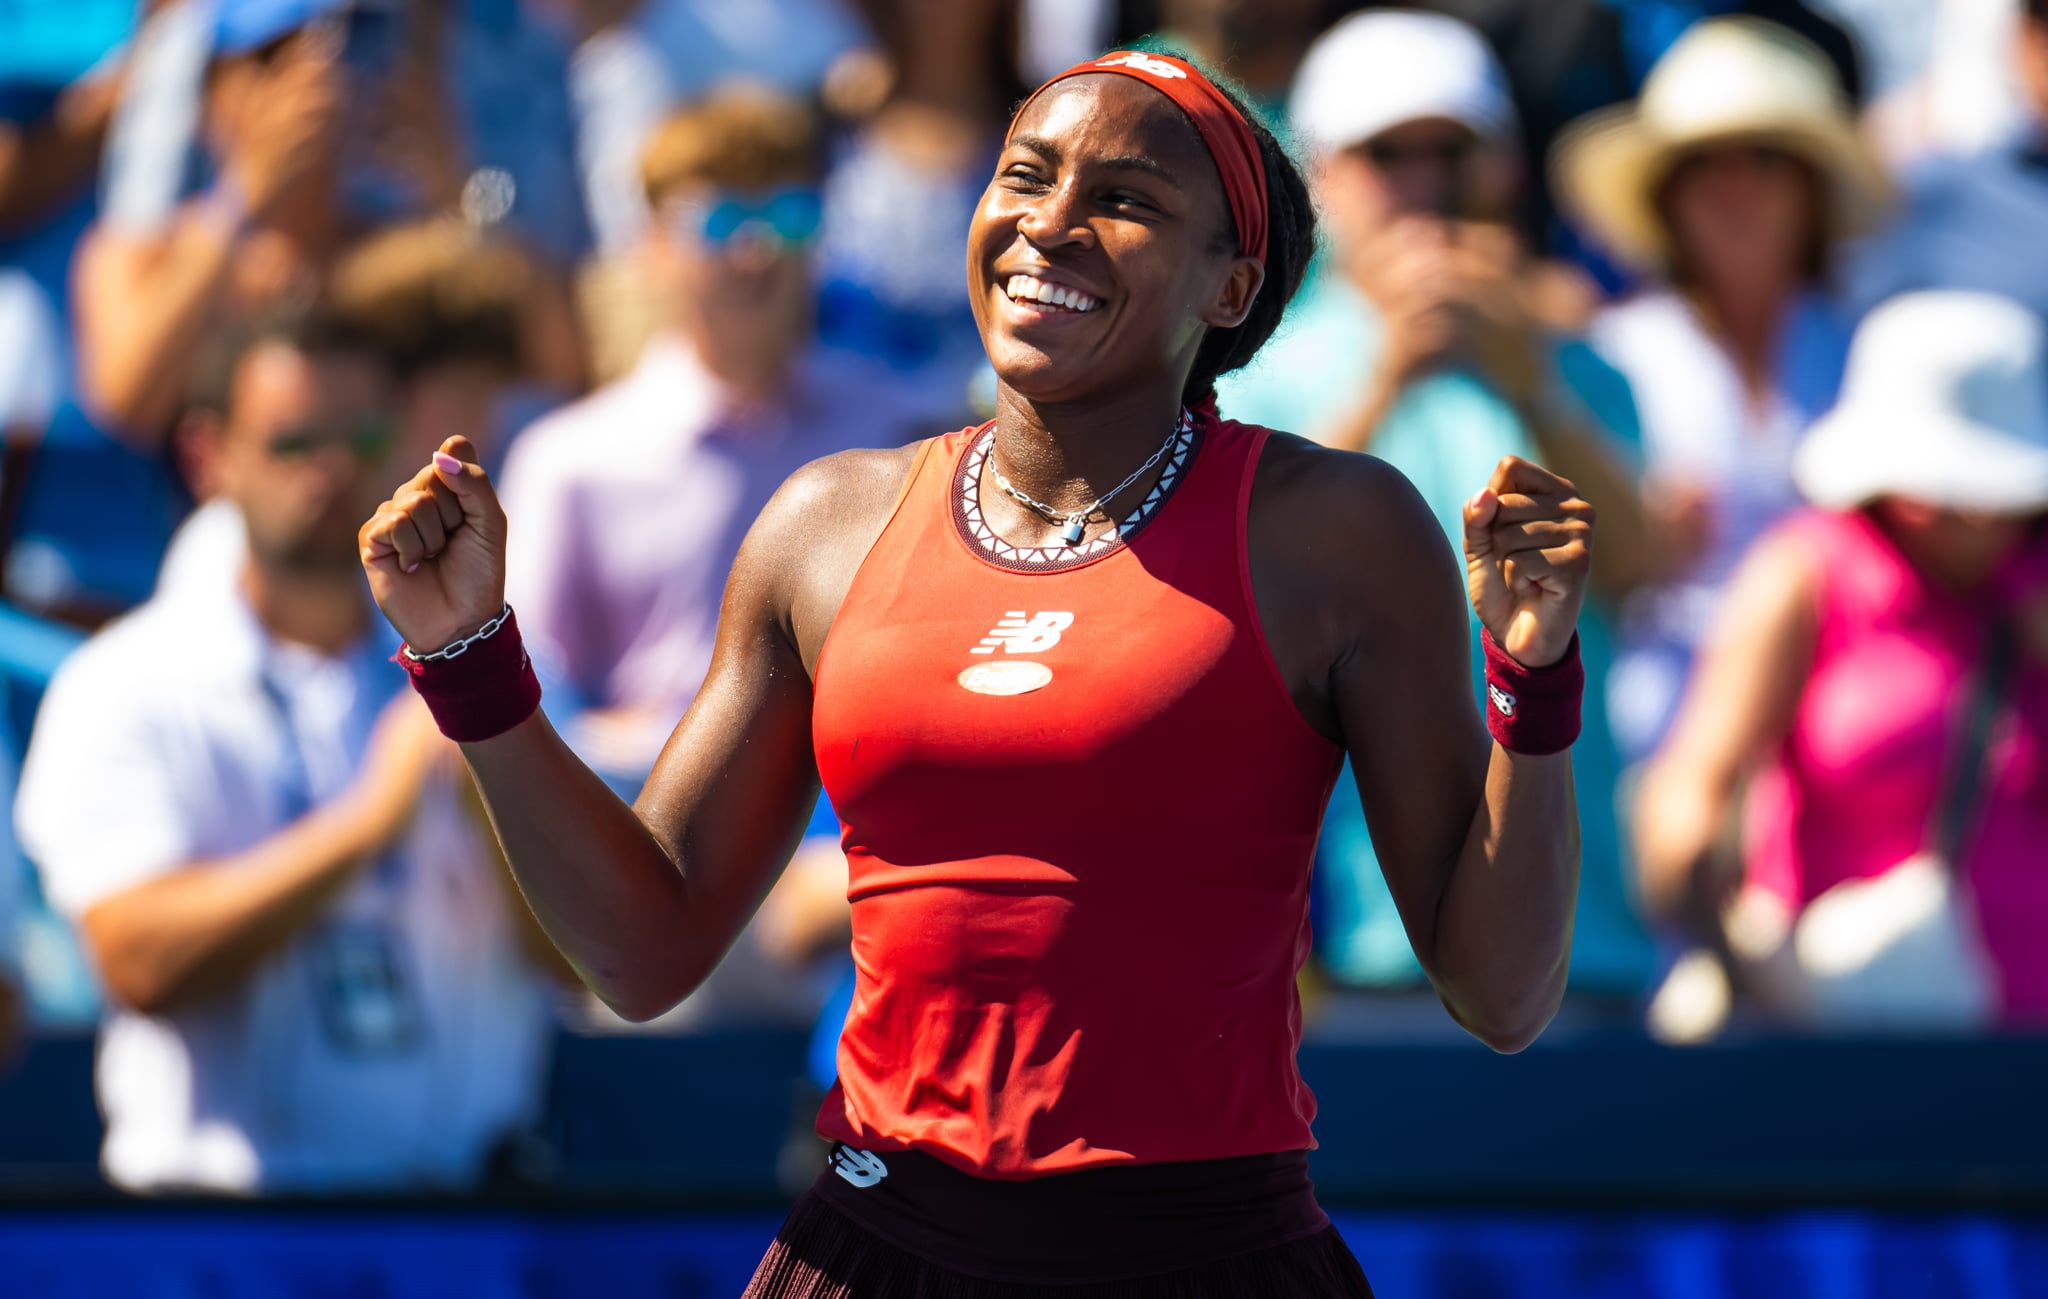 MASON, OHIO - AUGUST 20: Coco Gauff of the United States reacts to defeating Karolina Muchova of the Czech Republic in the womens singles final on Day 8 of the Western & Southern Open at Lindner Family Tennis Center on August 20, 2023 in Mason, Ohio (Photo by Robert Prange/Getty Images)